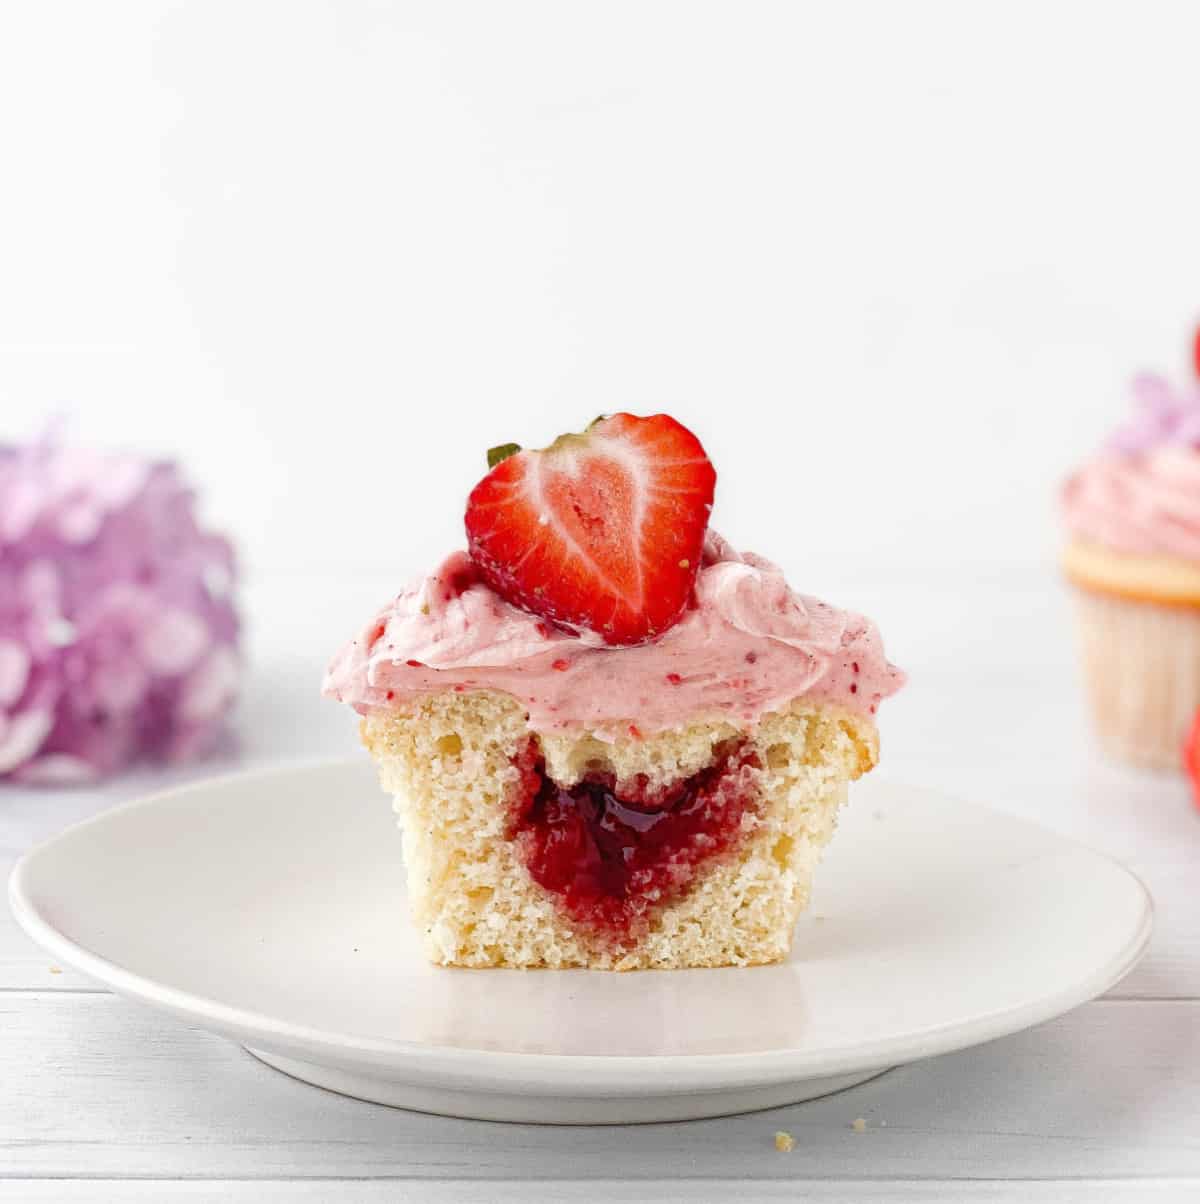 Strawberry Filled Cupcake cut in half to show the strawberry jam inside.